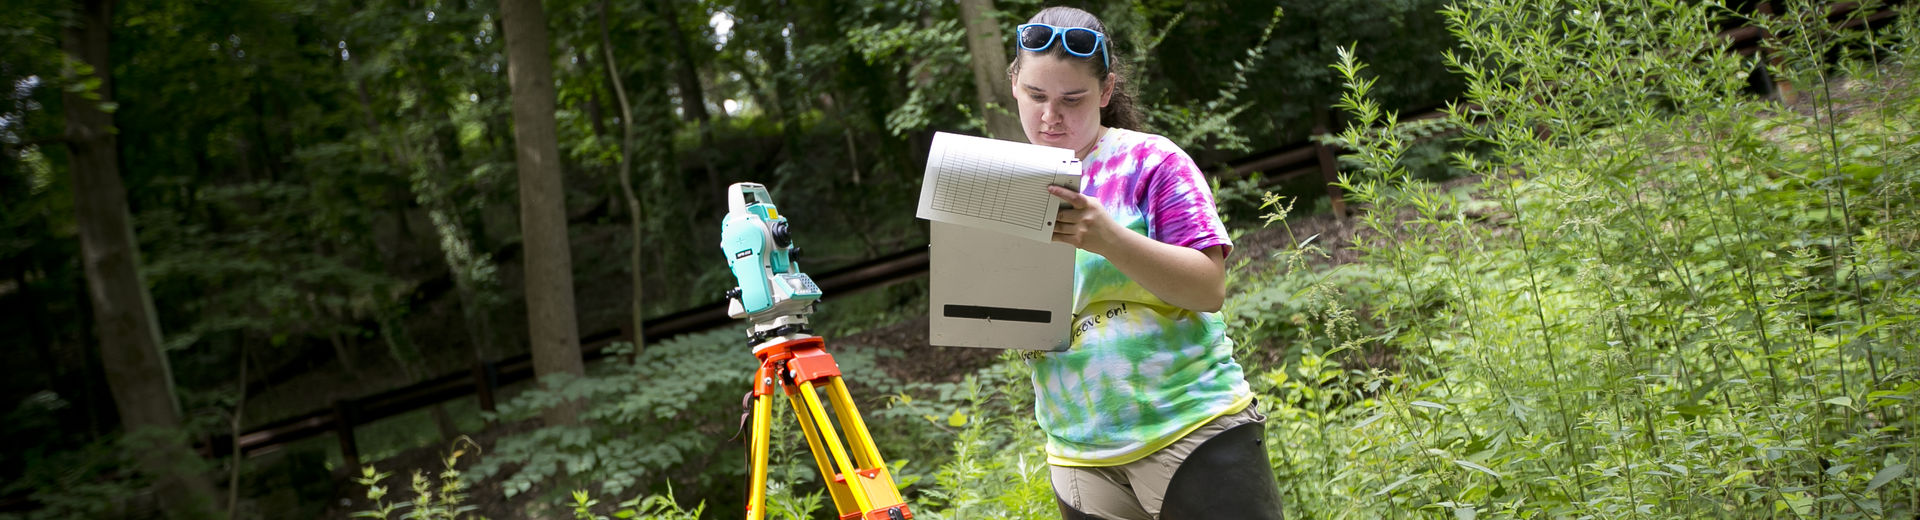 Environmental science student working in the field